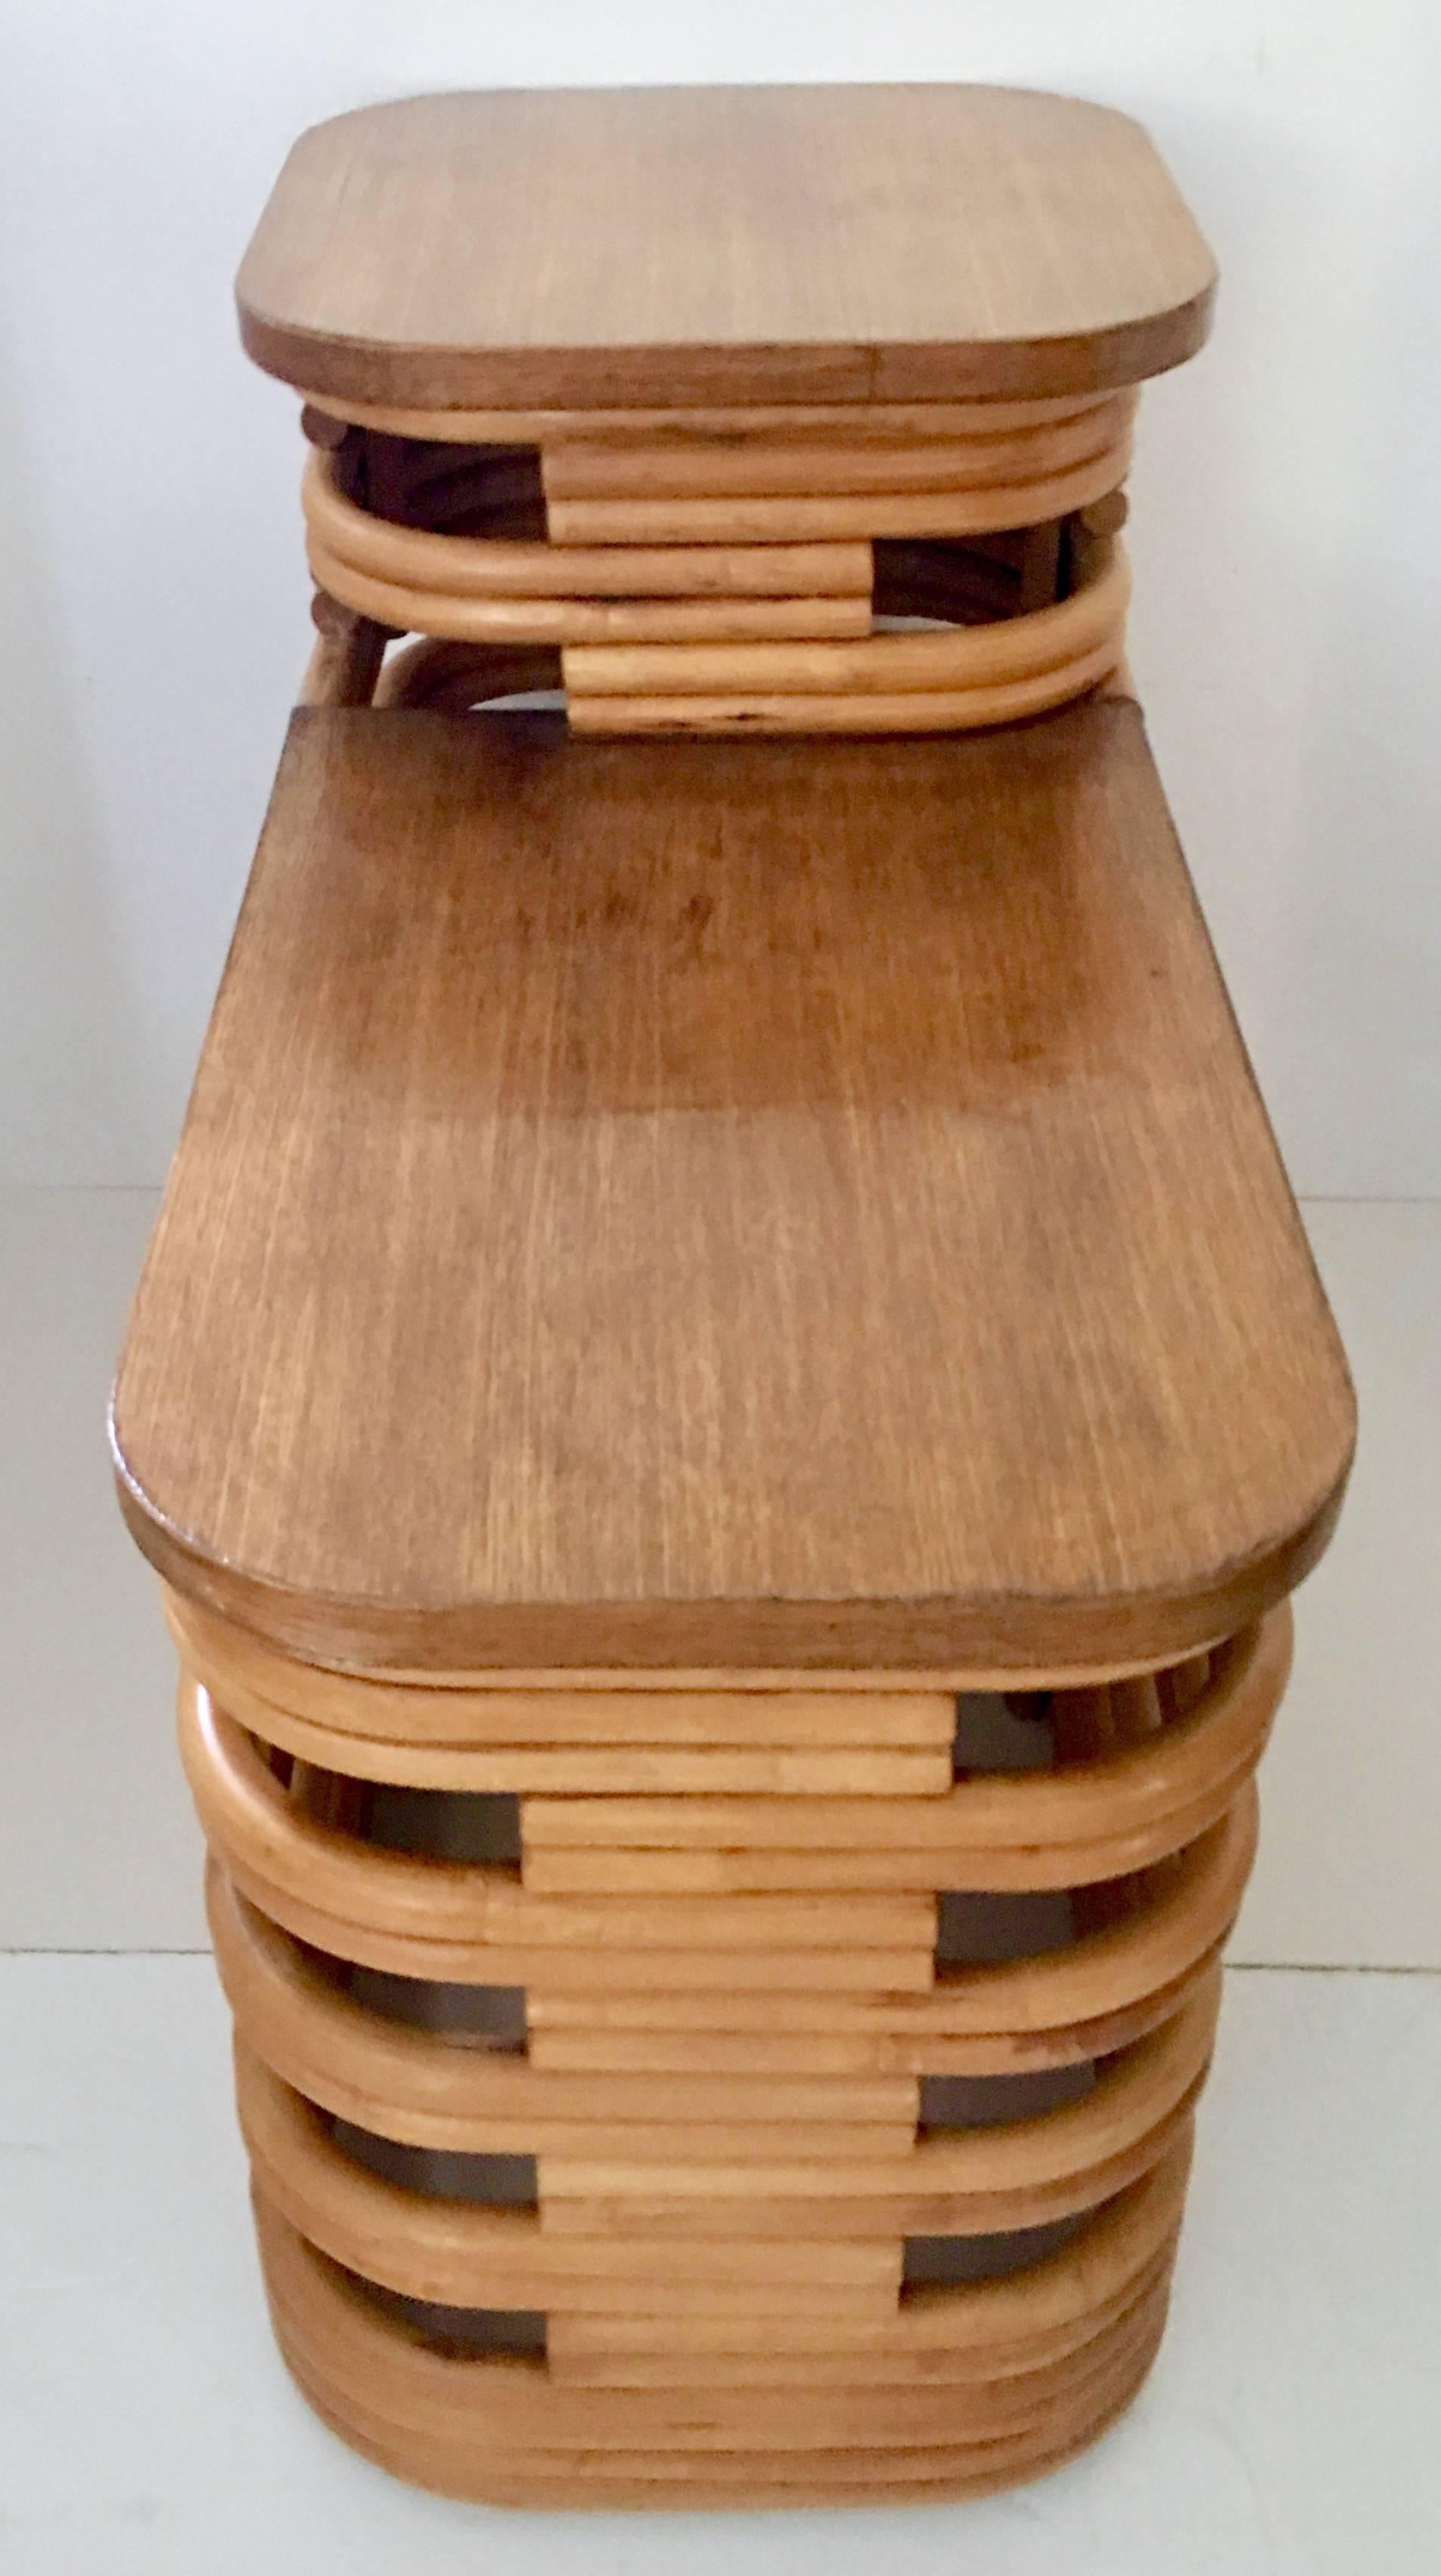 1940s Paul Frankl designed Art Deco style two-tier stacked rattan side table with stylized cut-out sides and beautiful mahogany tops on both tiers.